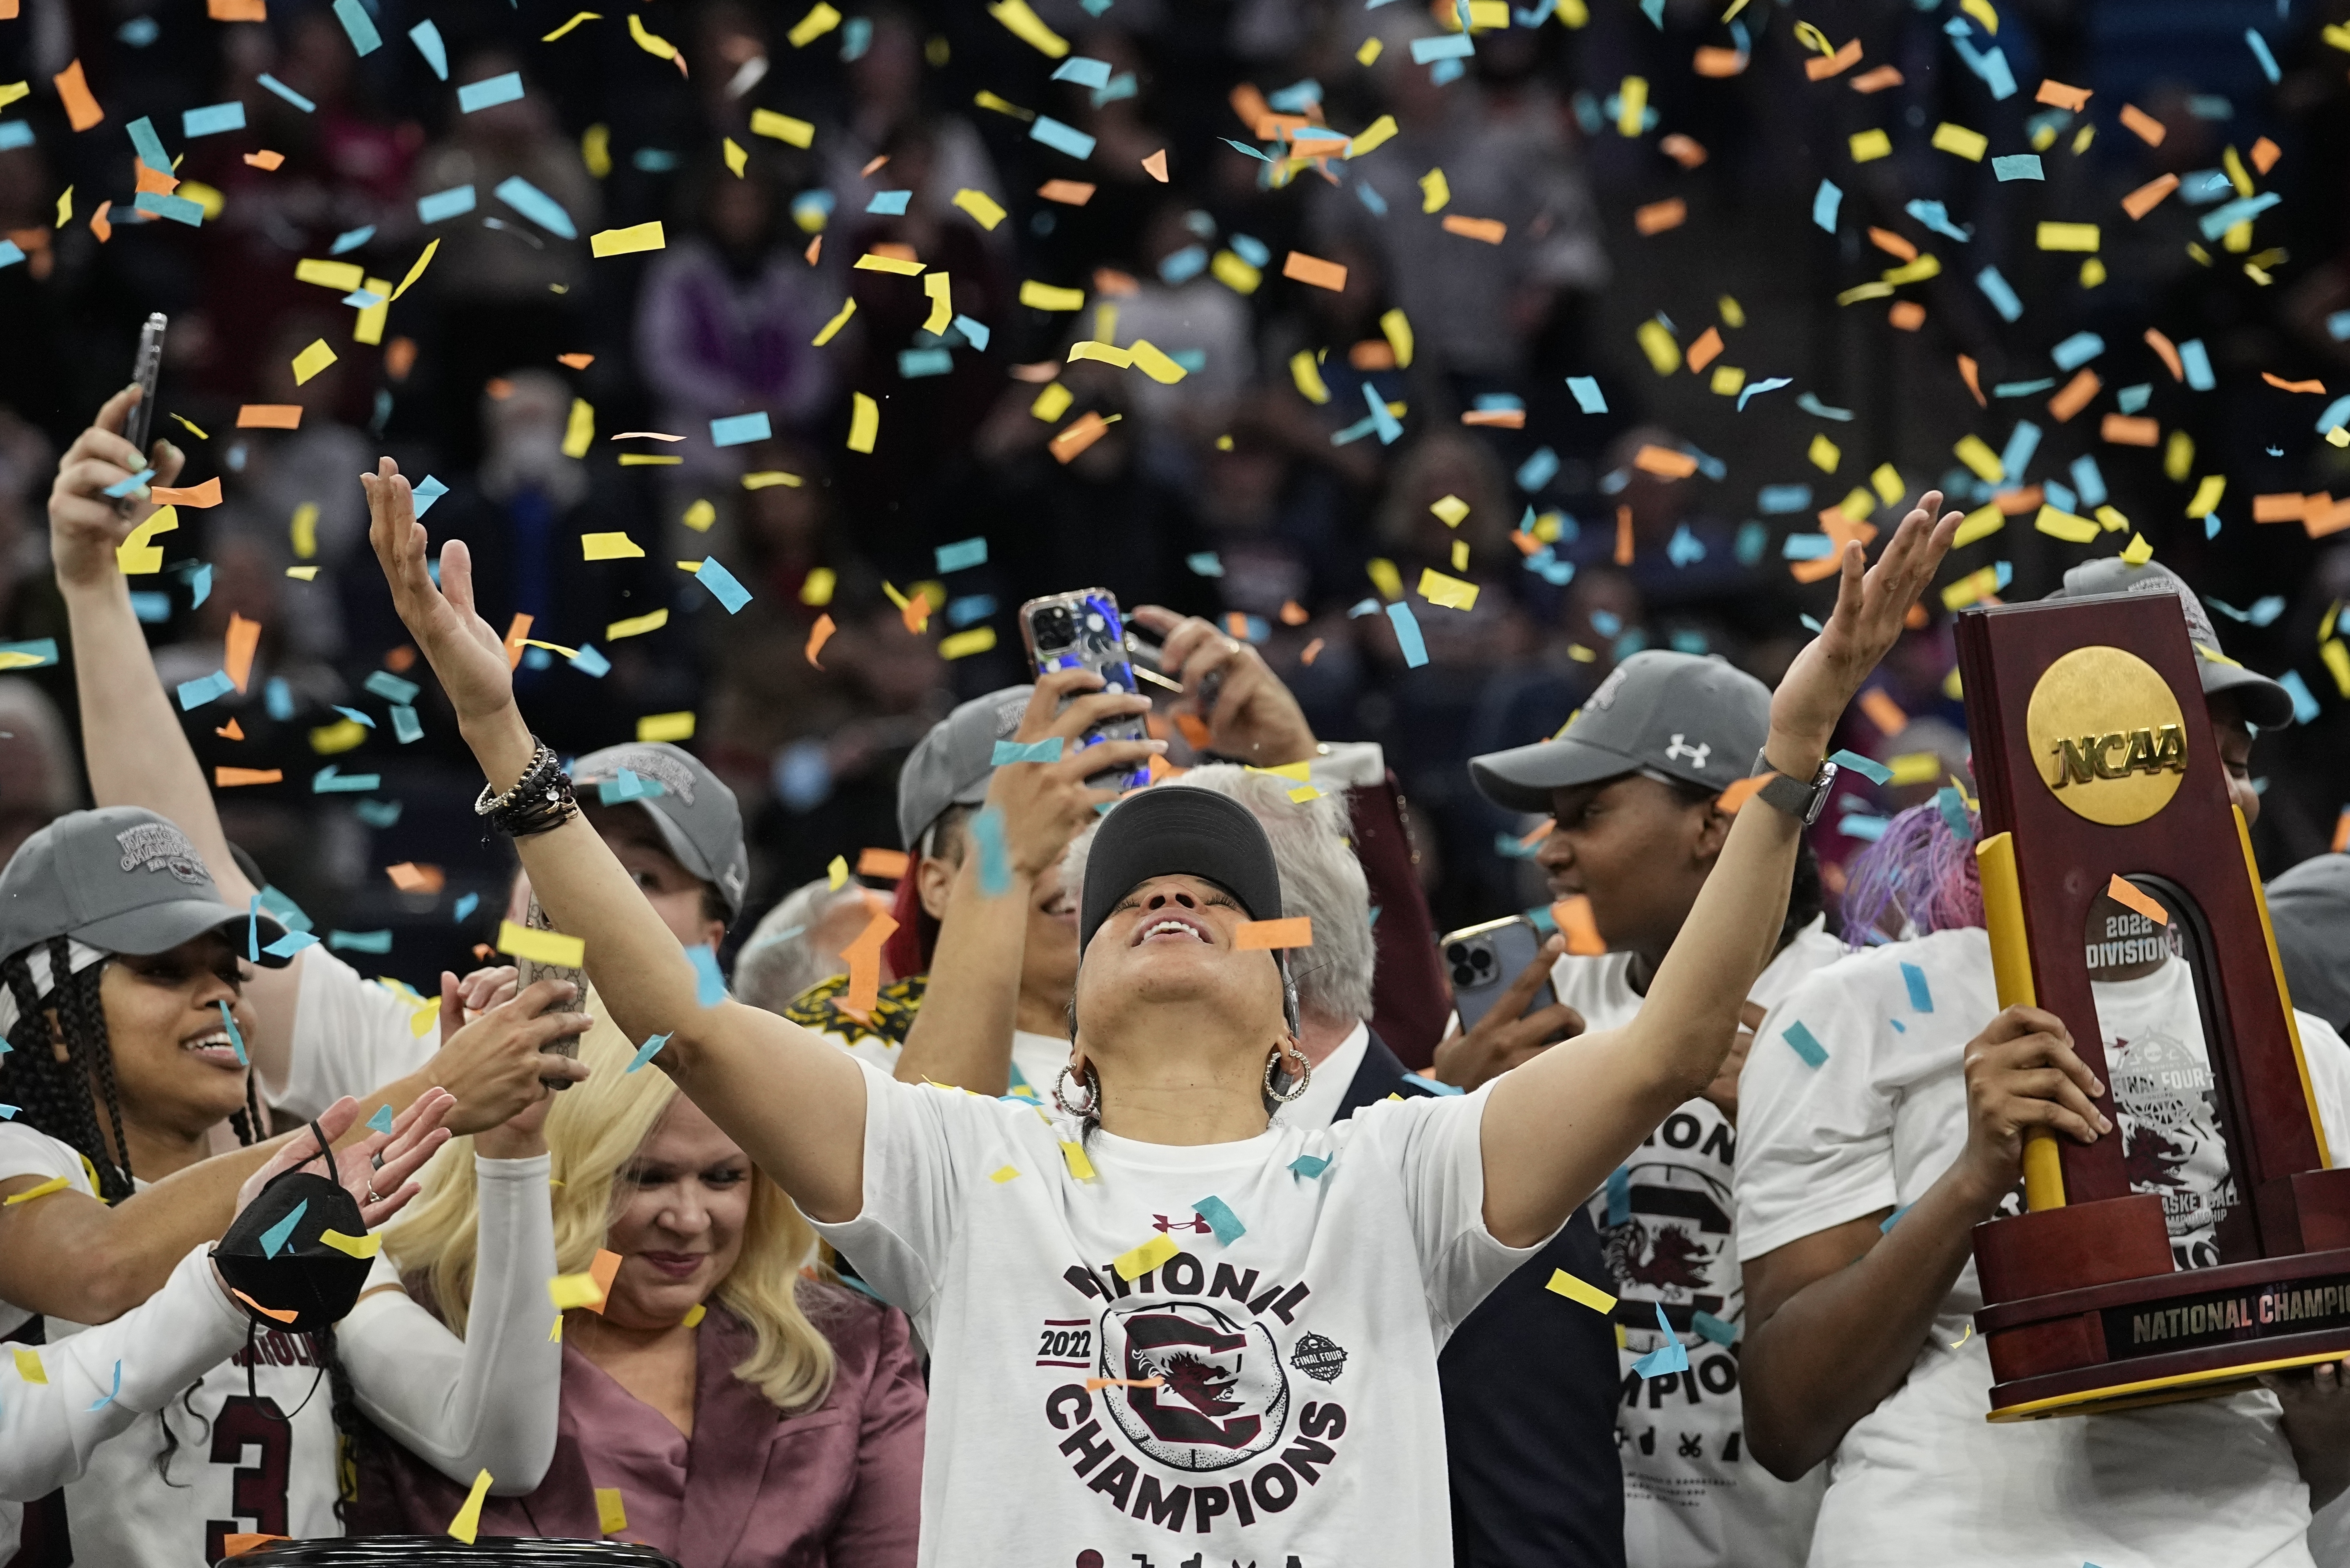 Dawn Staley Is Now The NCAA's Highest Paid Women's Coach